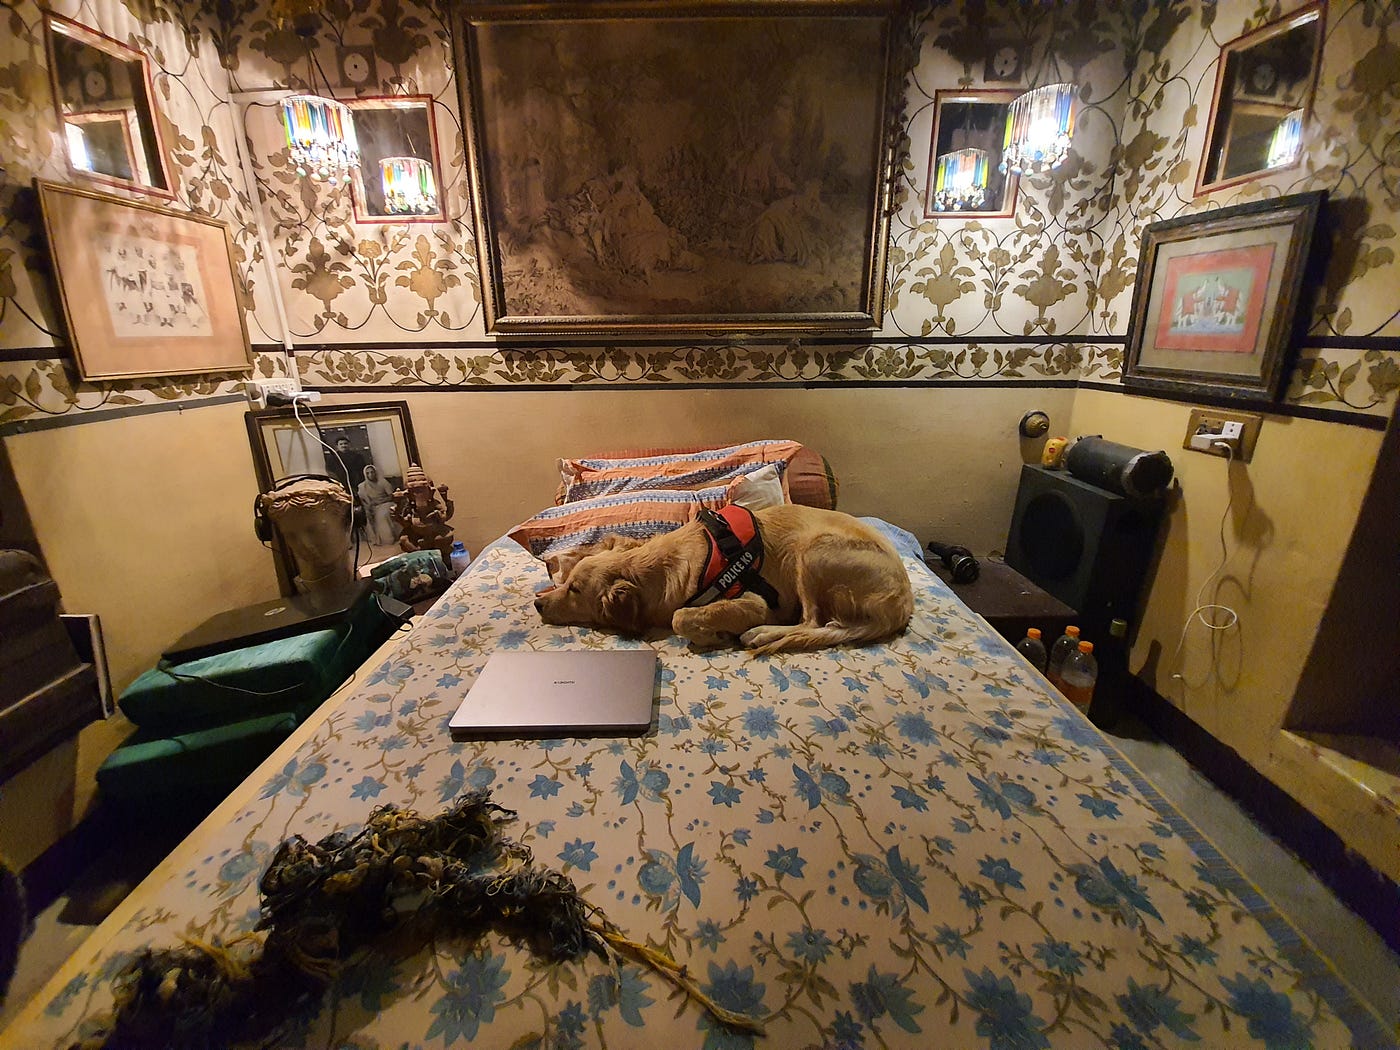 My pet golden retriever dog Alzu and I stayed at Hotel Bhairon Vilas in Bikaner. This is a pet-friendly heritage hotel that also has 2 pets living on the property!